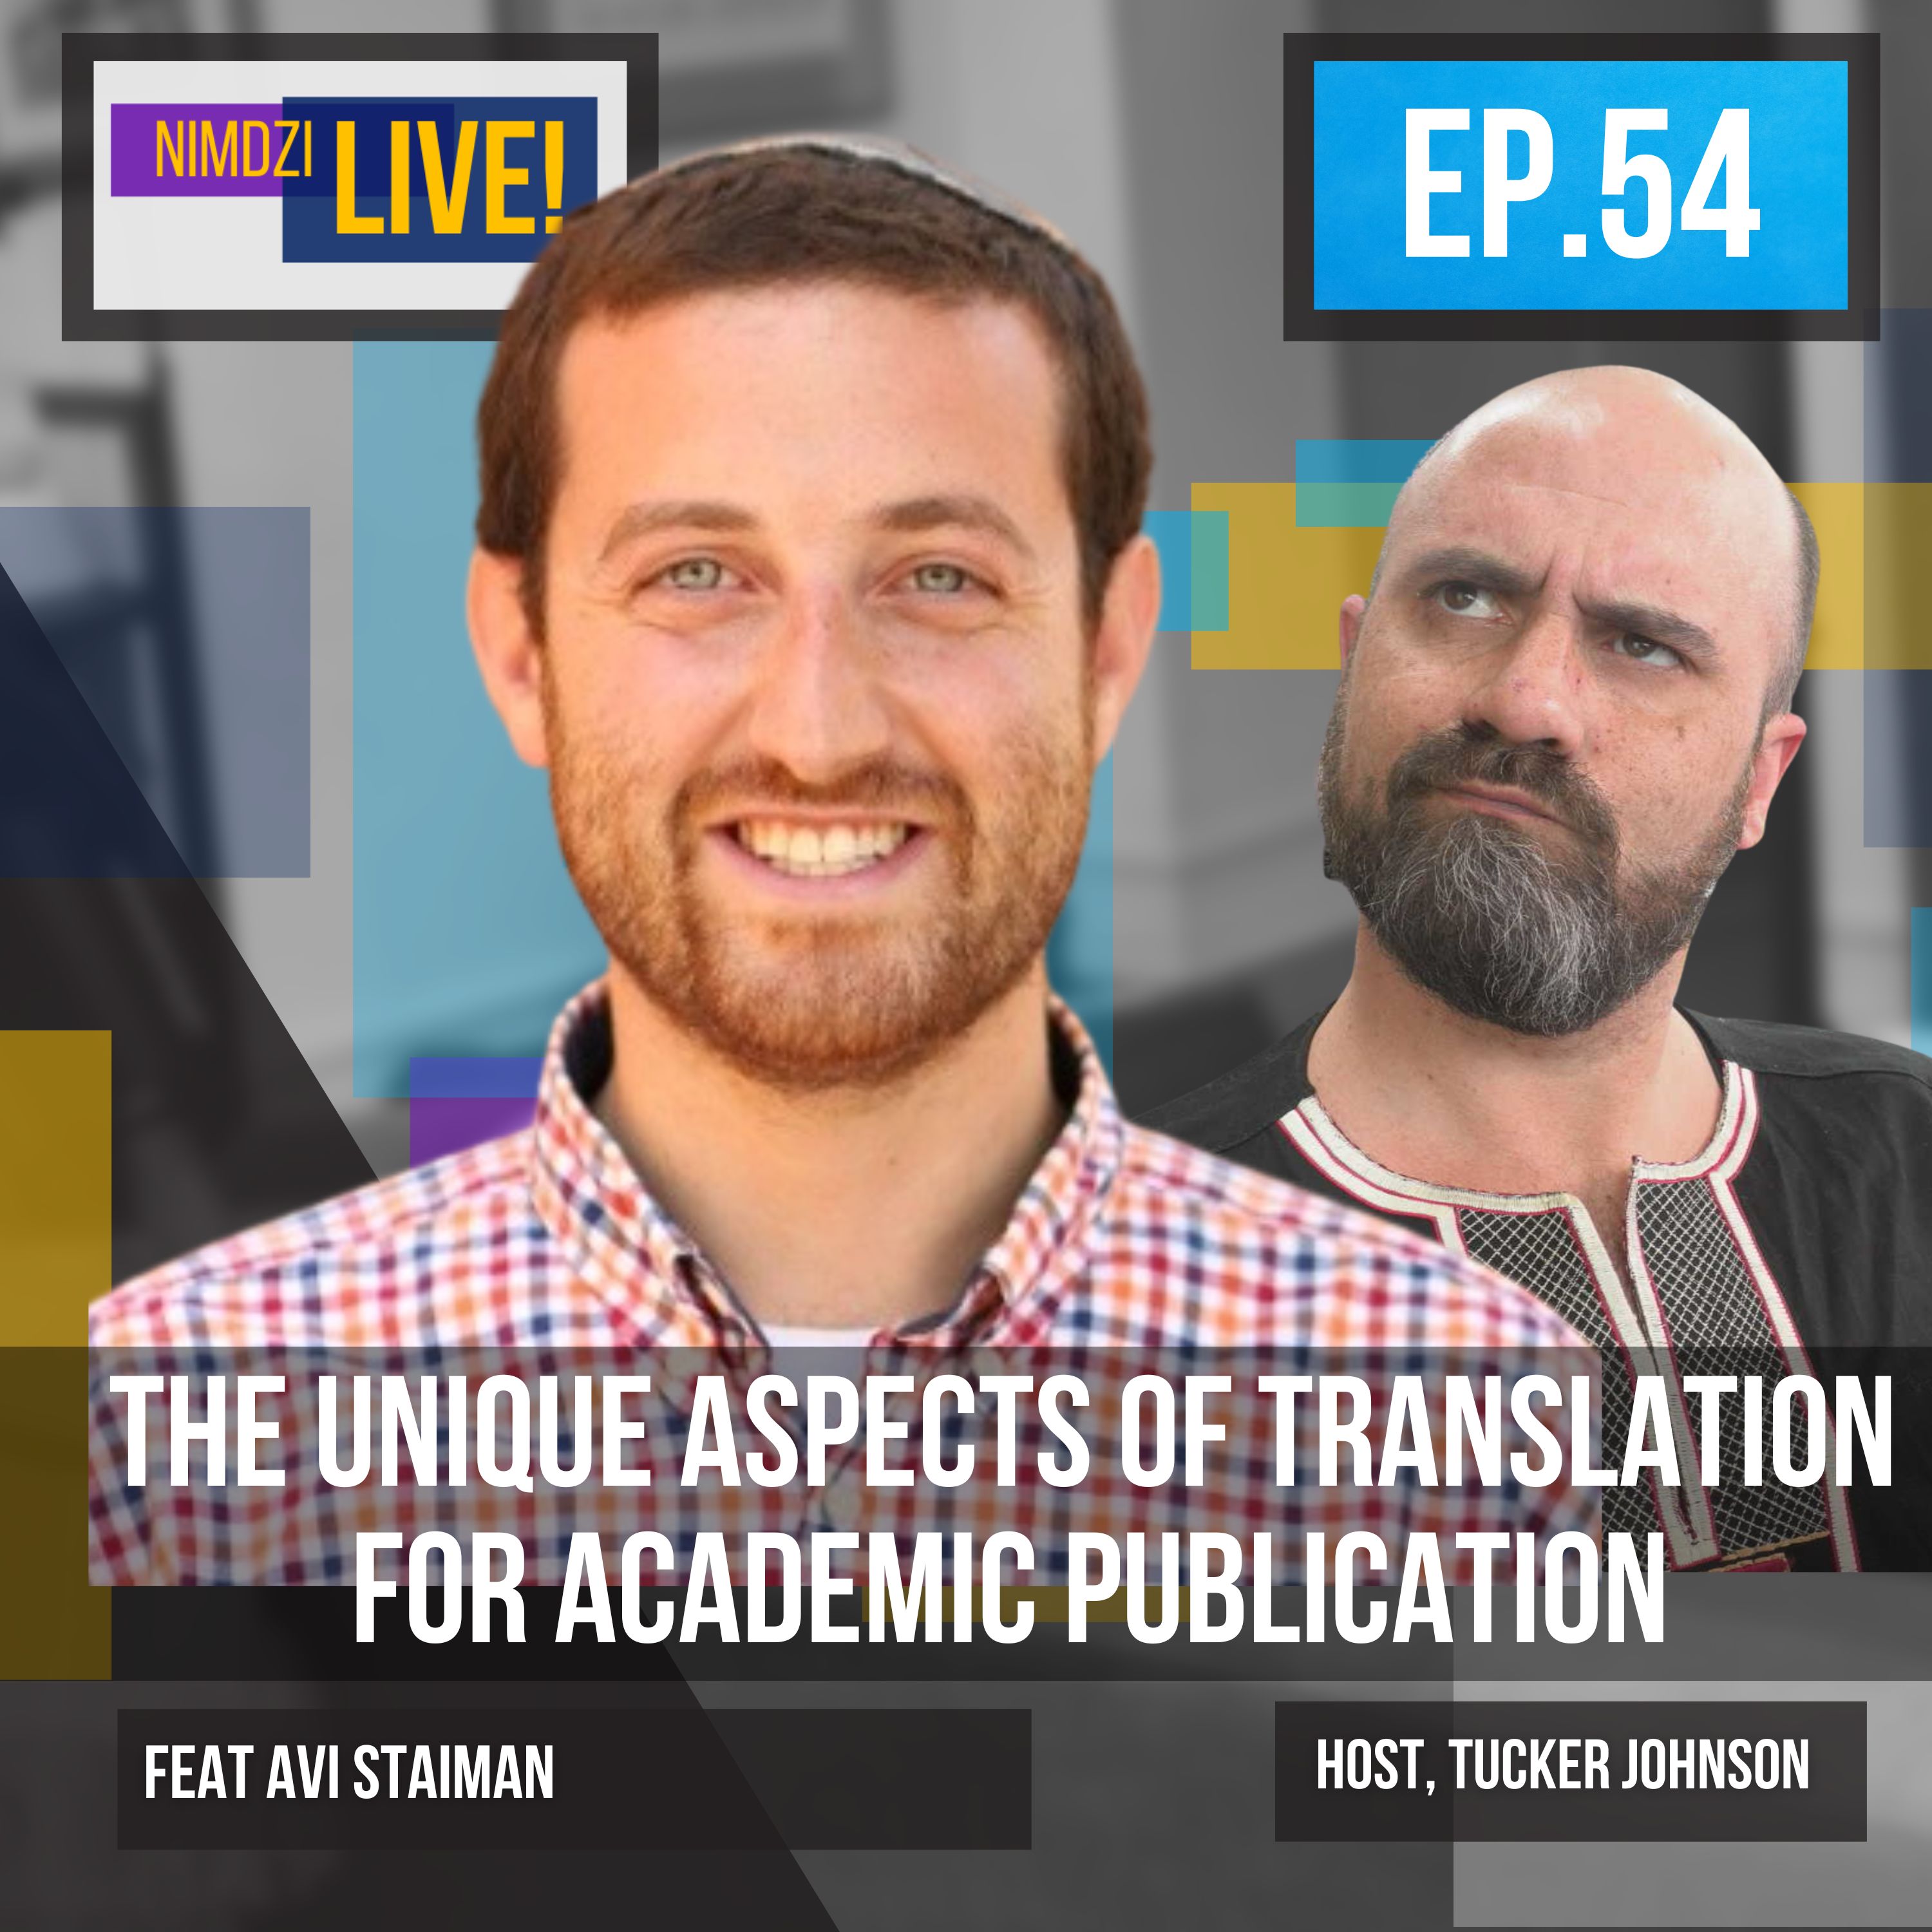 The Unique Aspects of Translation for Academic Publication (Ft. Avi Staiman)